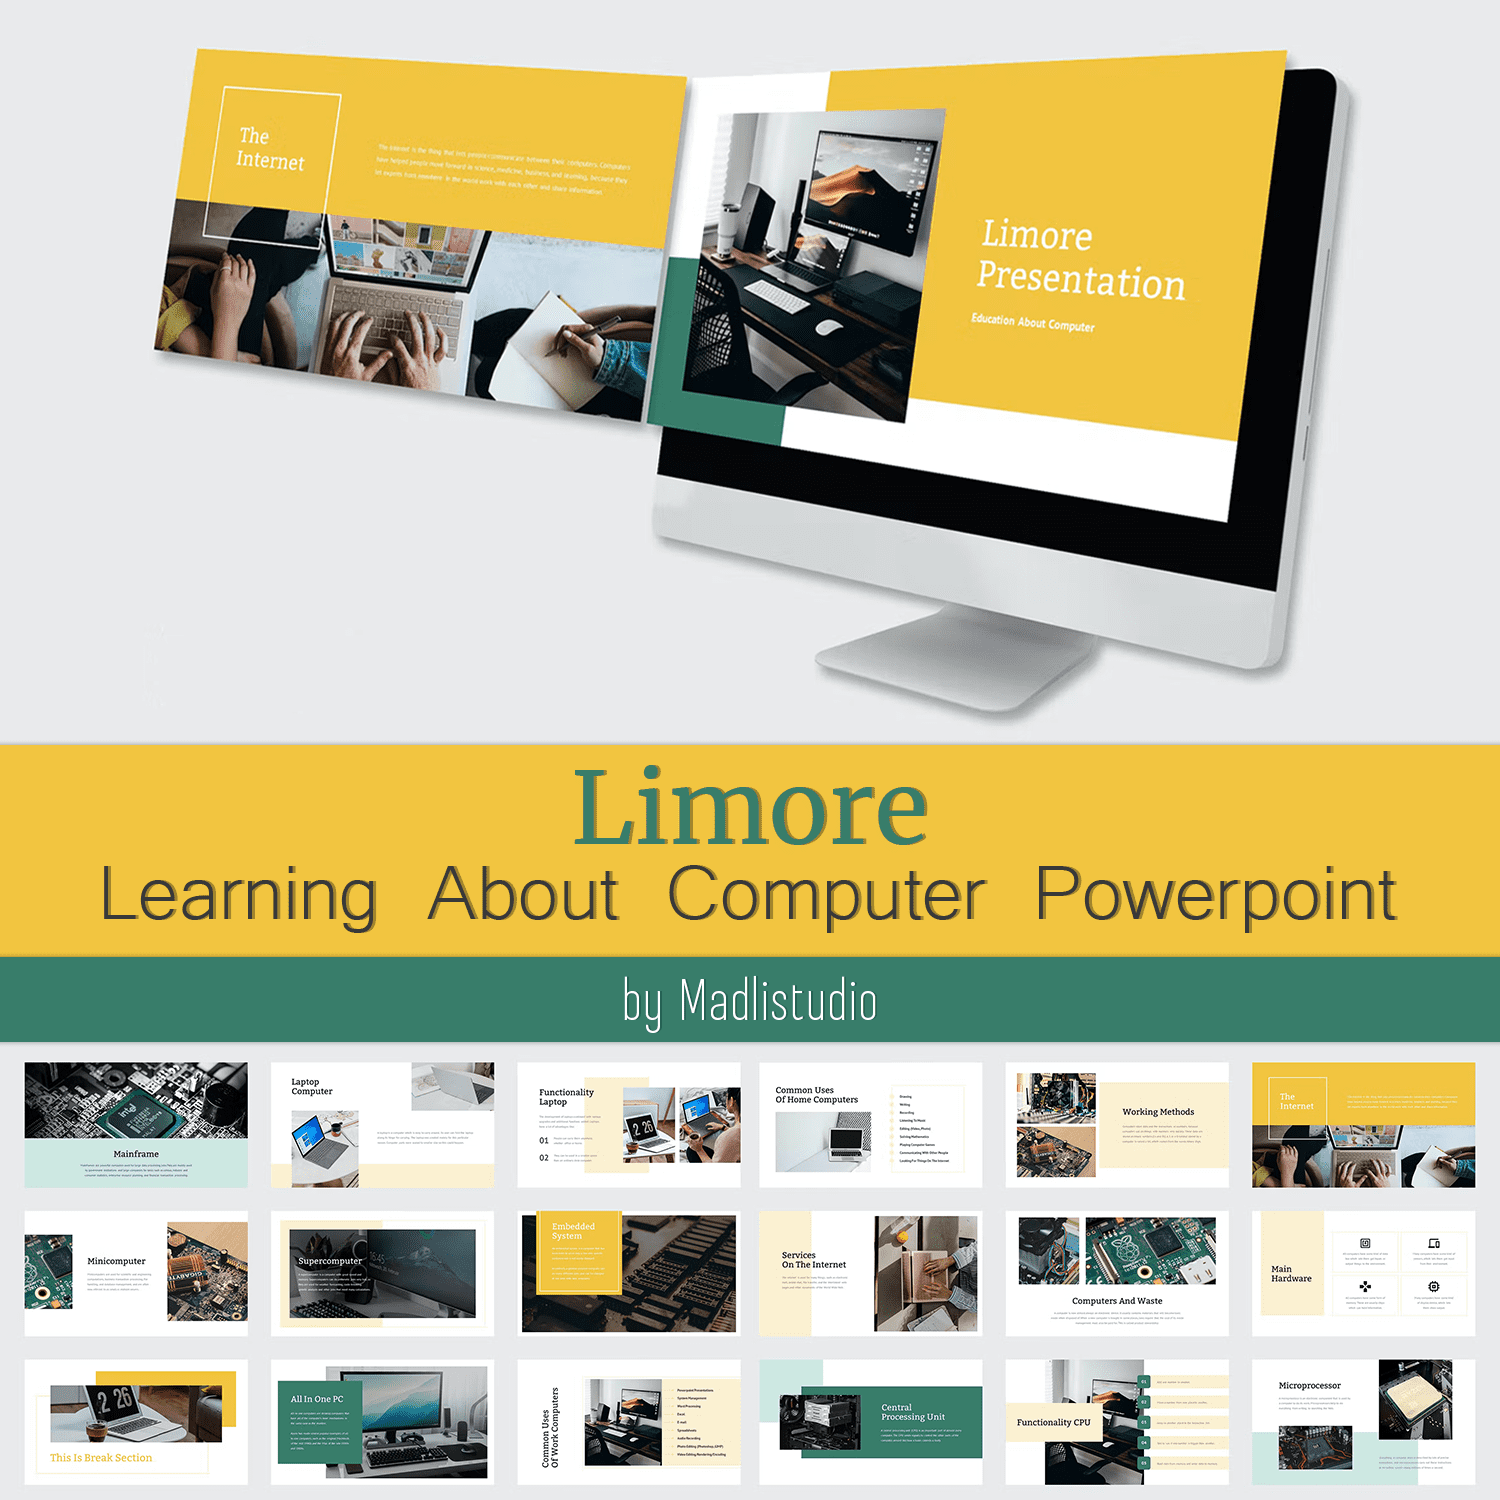 Limore - Learning Via Computer Powerpoint.